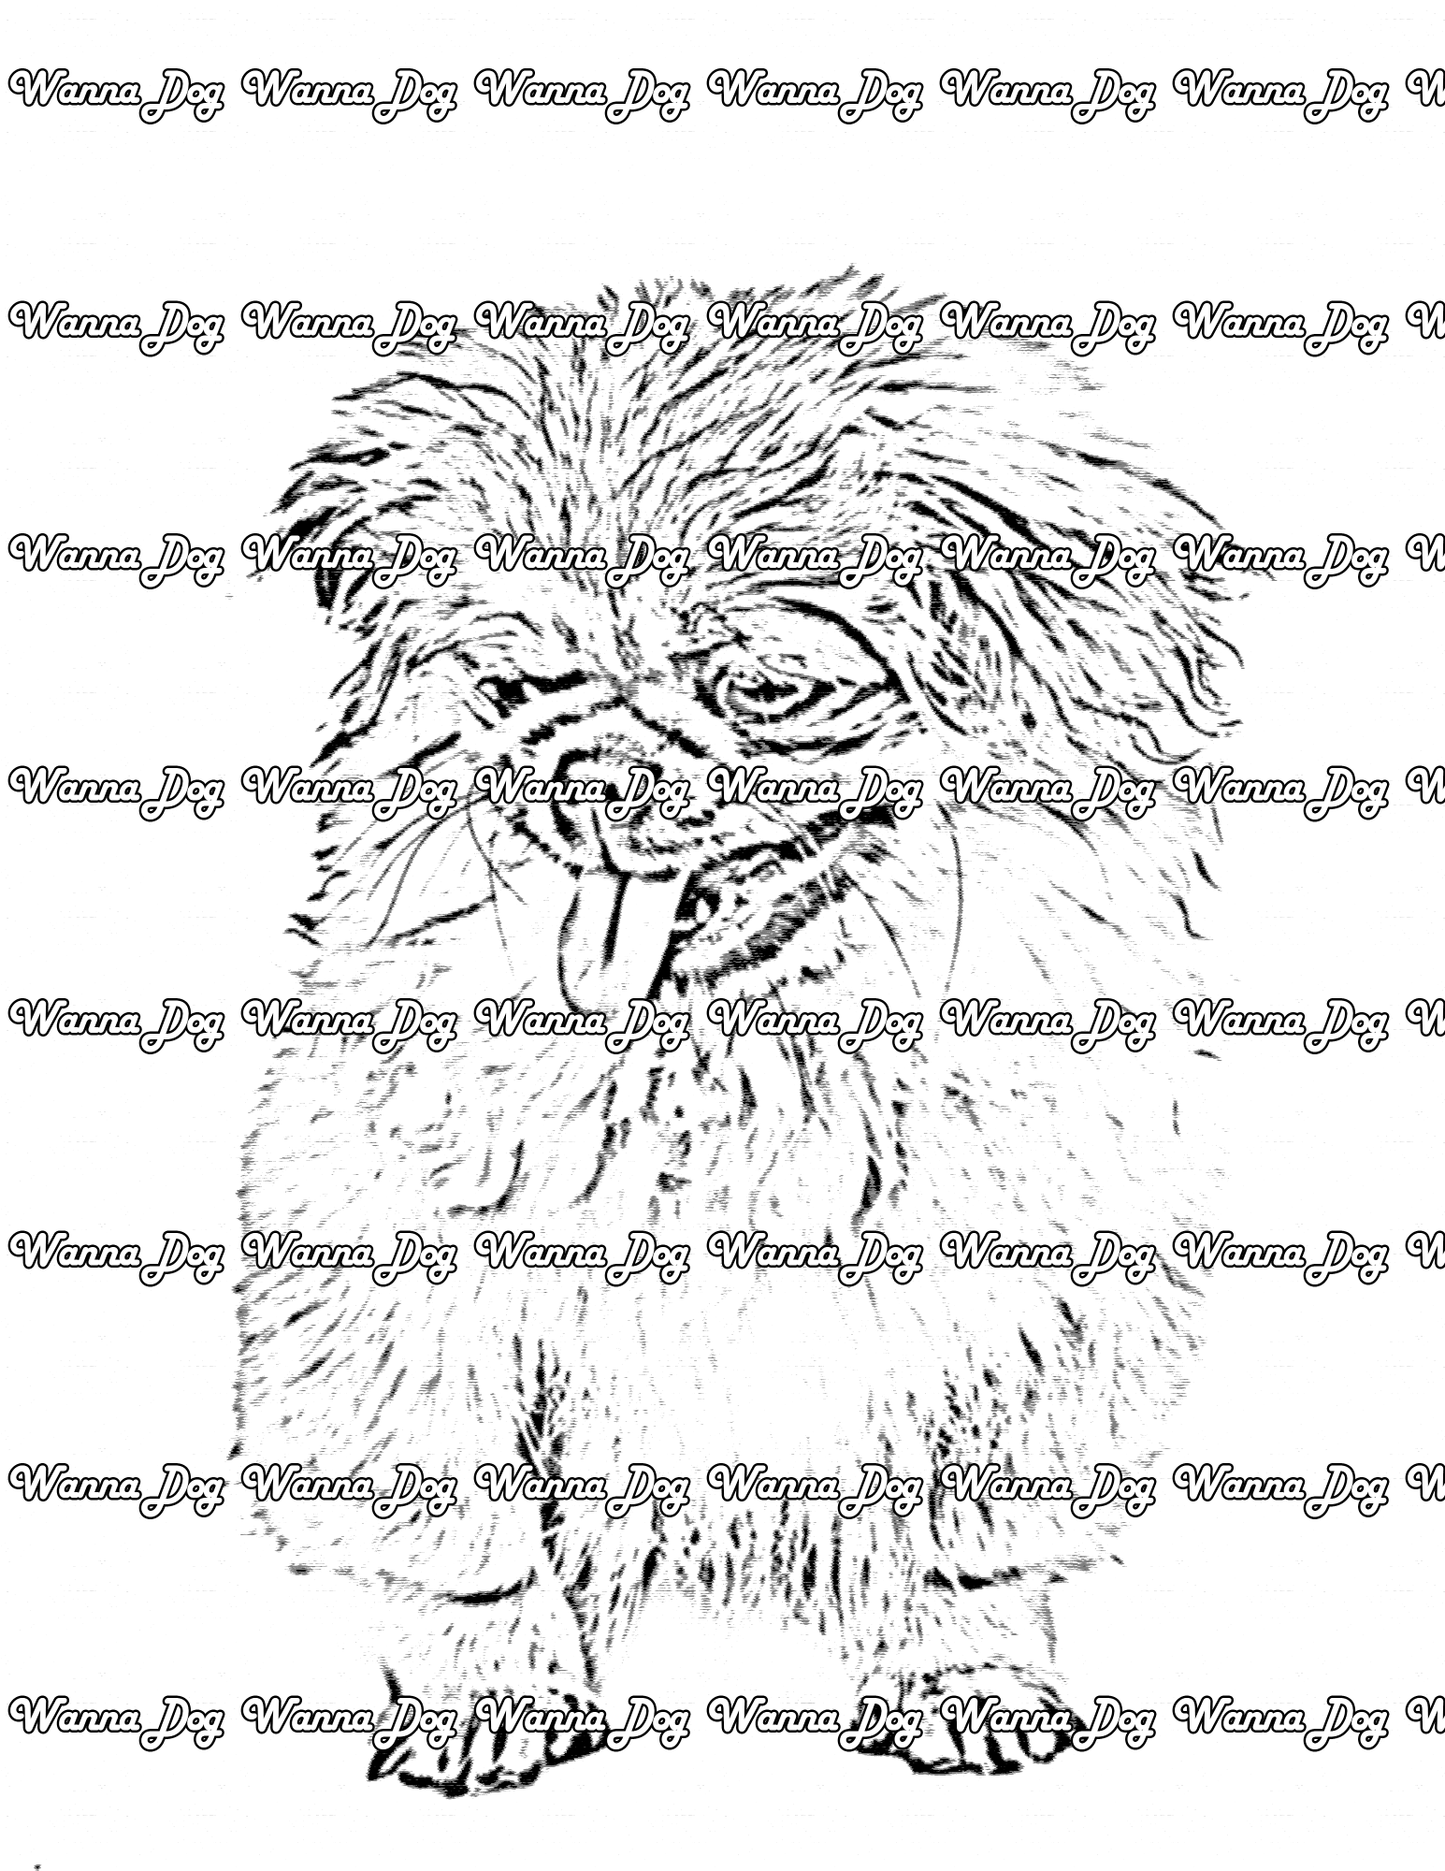 Pekingese Coloring Page of a Pekingese standing with their tongue out